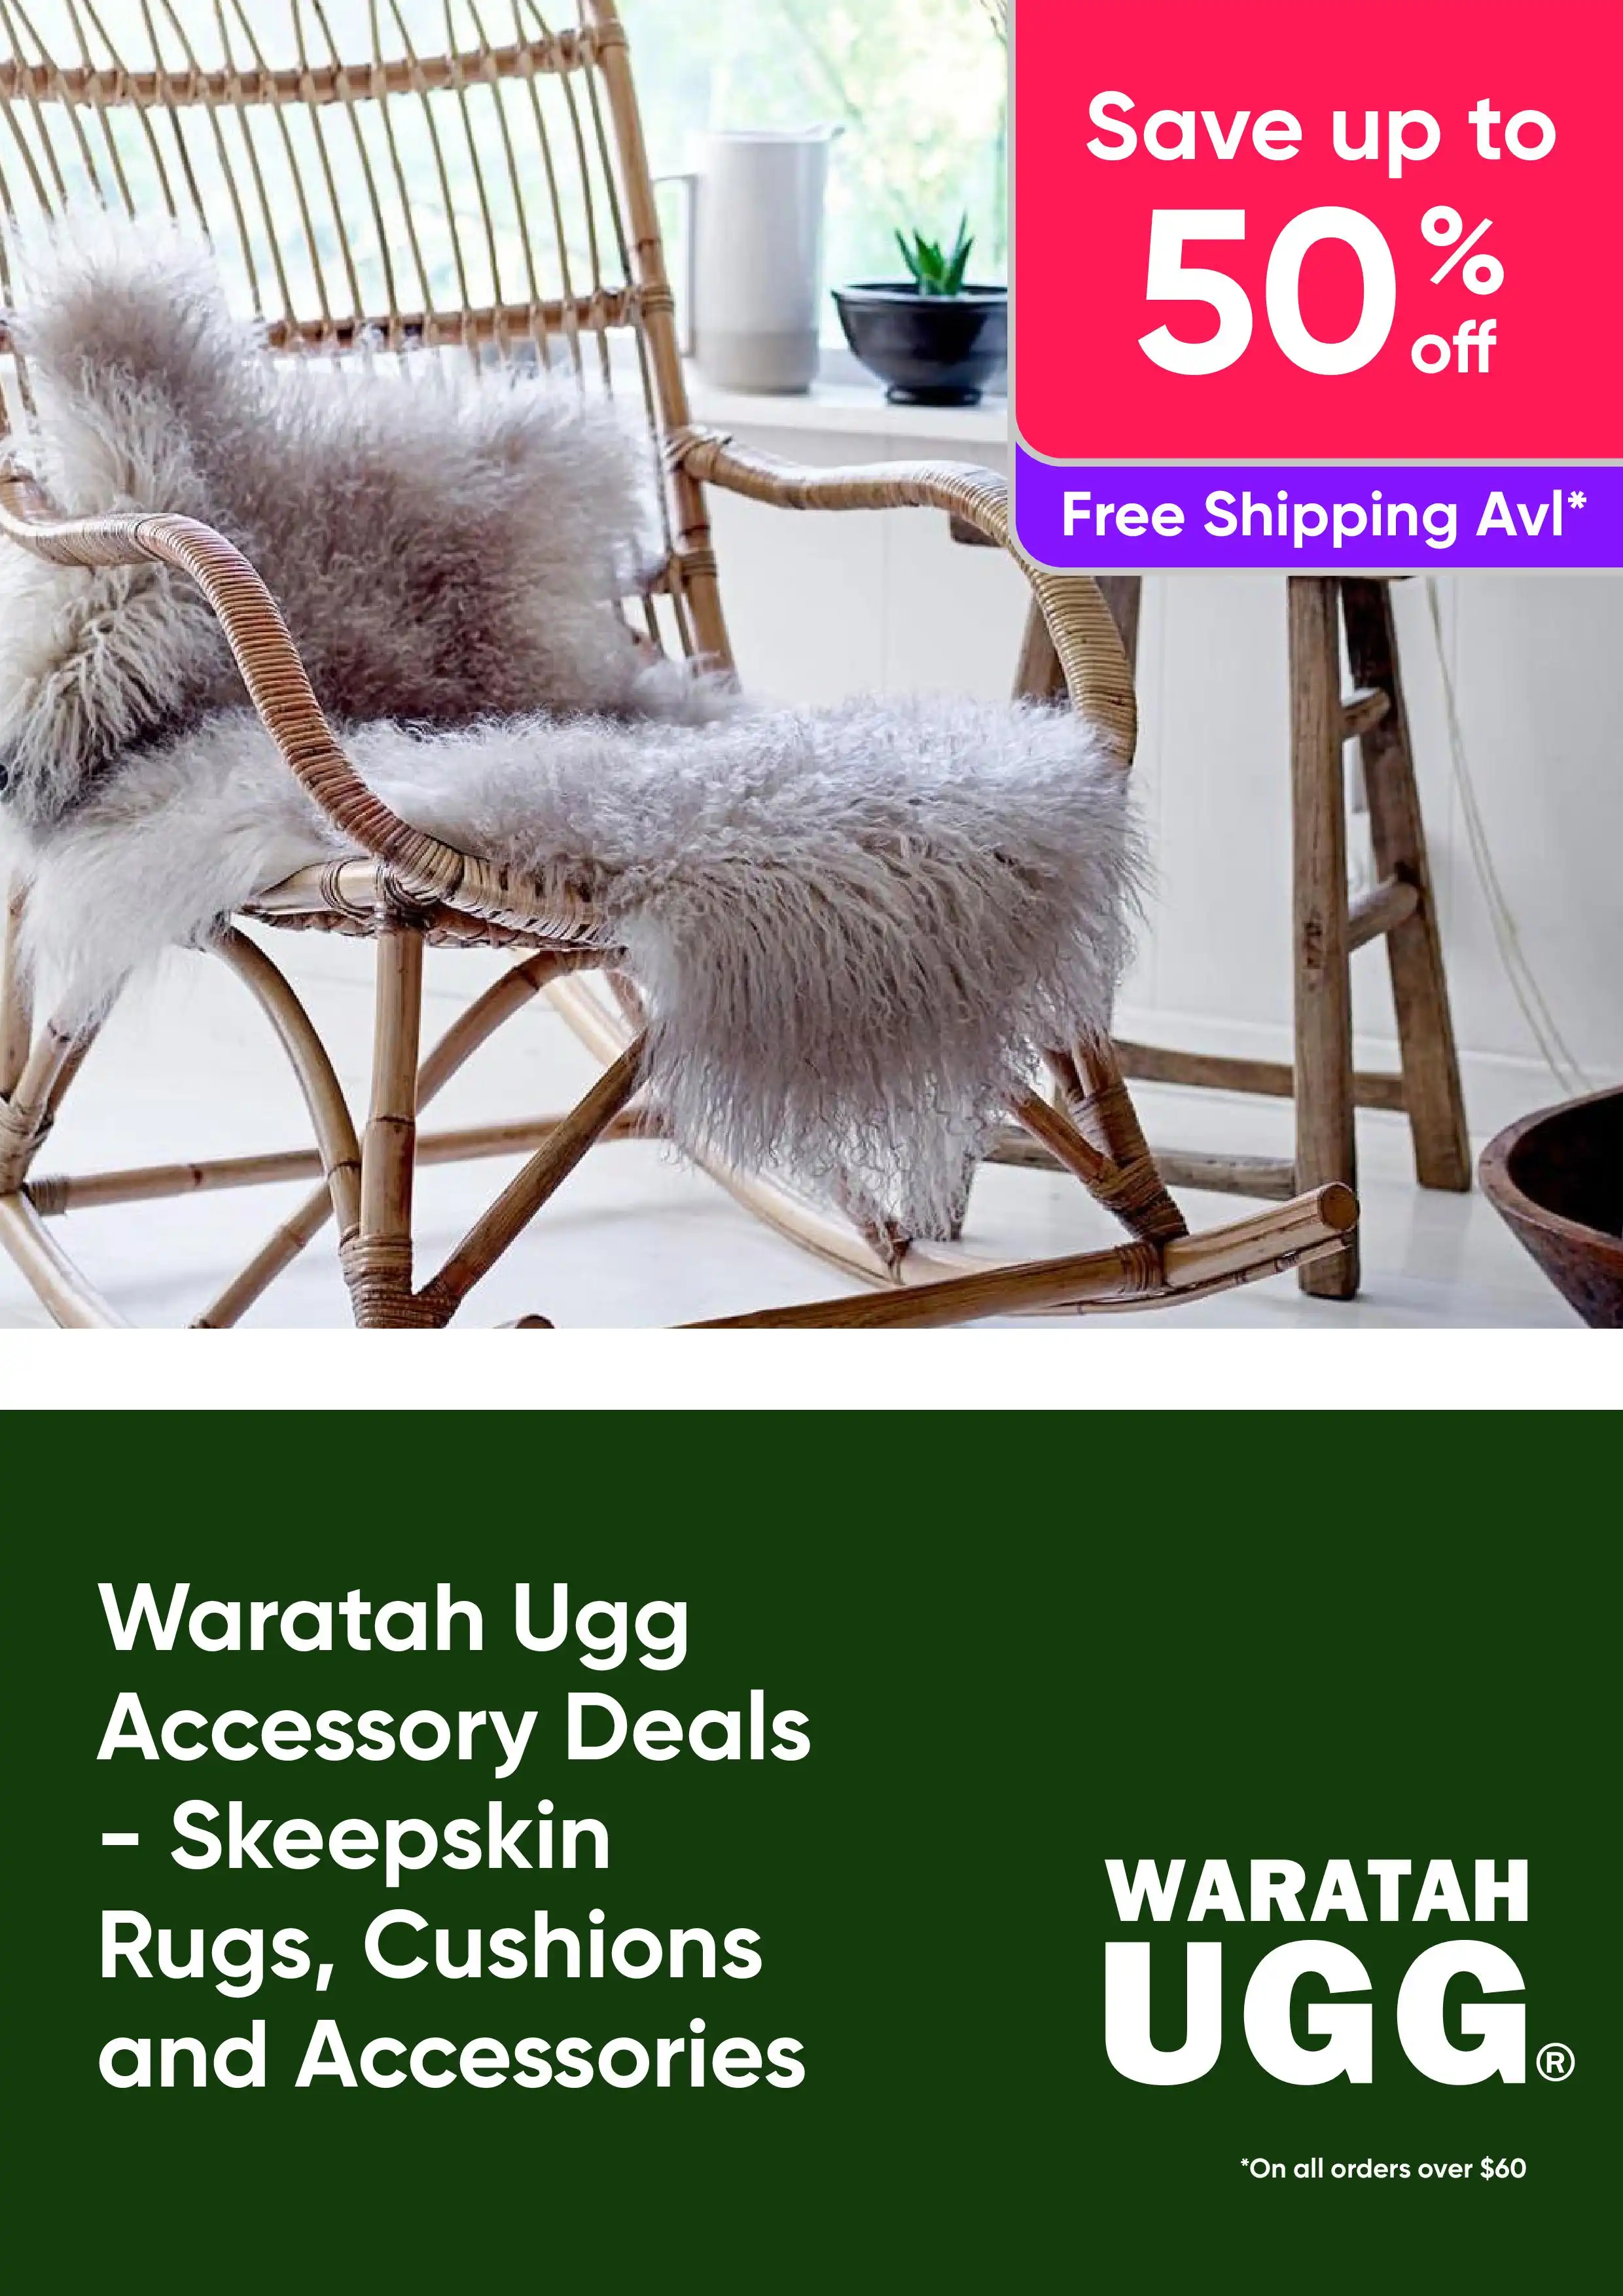 Waratah Ugg Accessory Deals - Save on Skeepskin Rugs, Cushions and Accessories